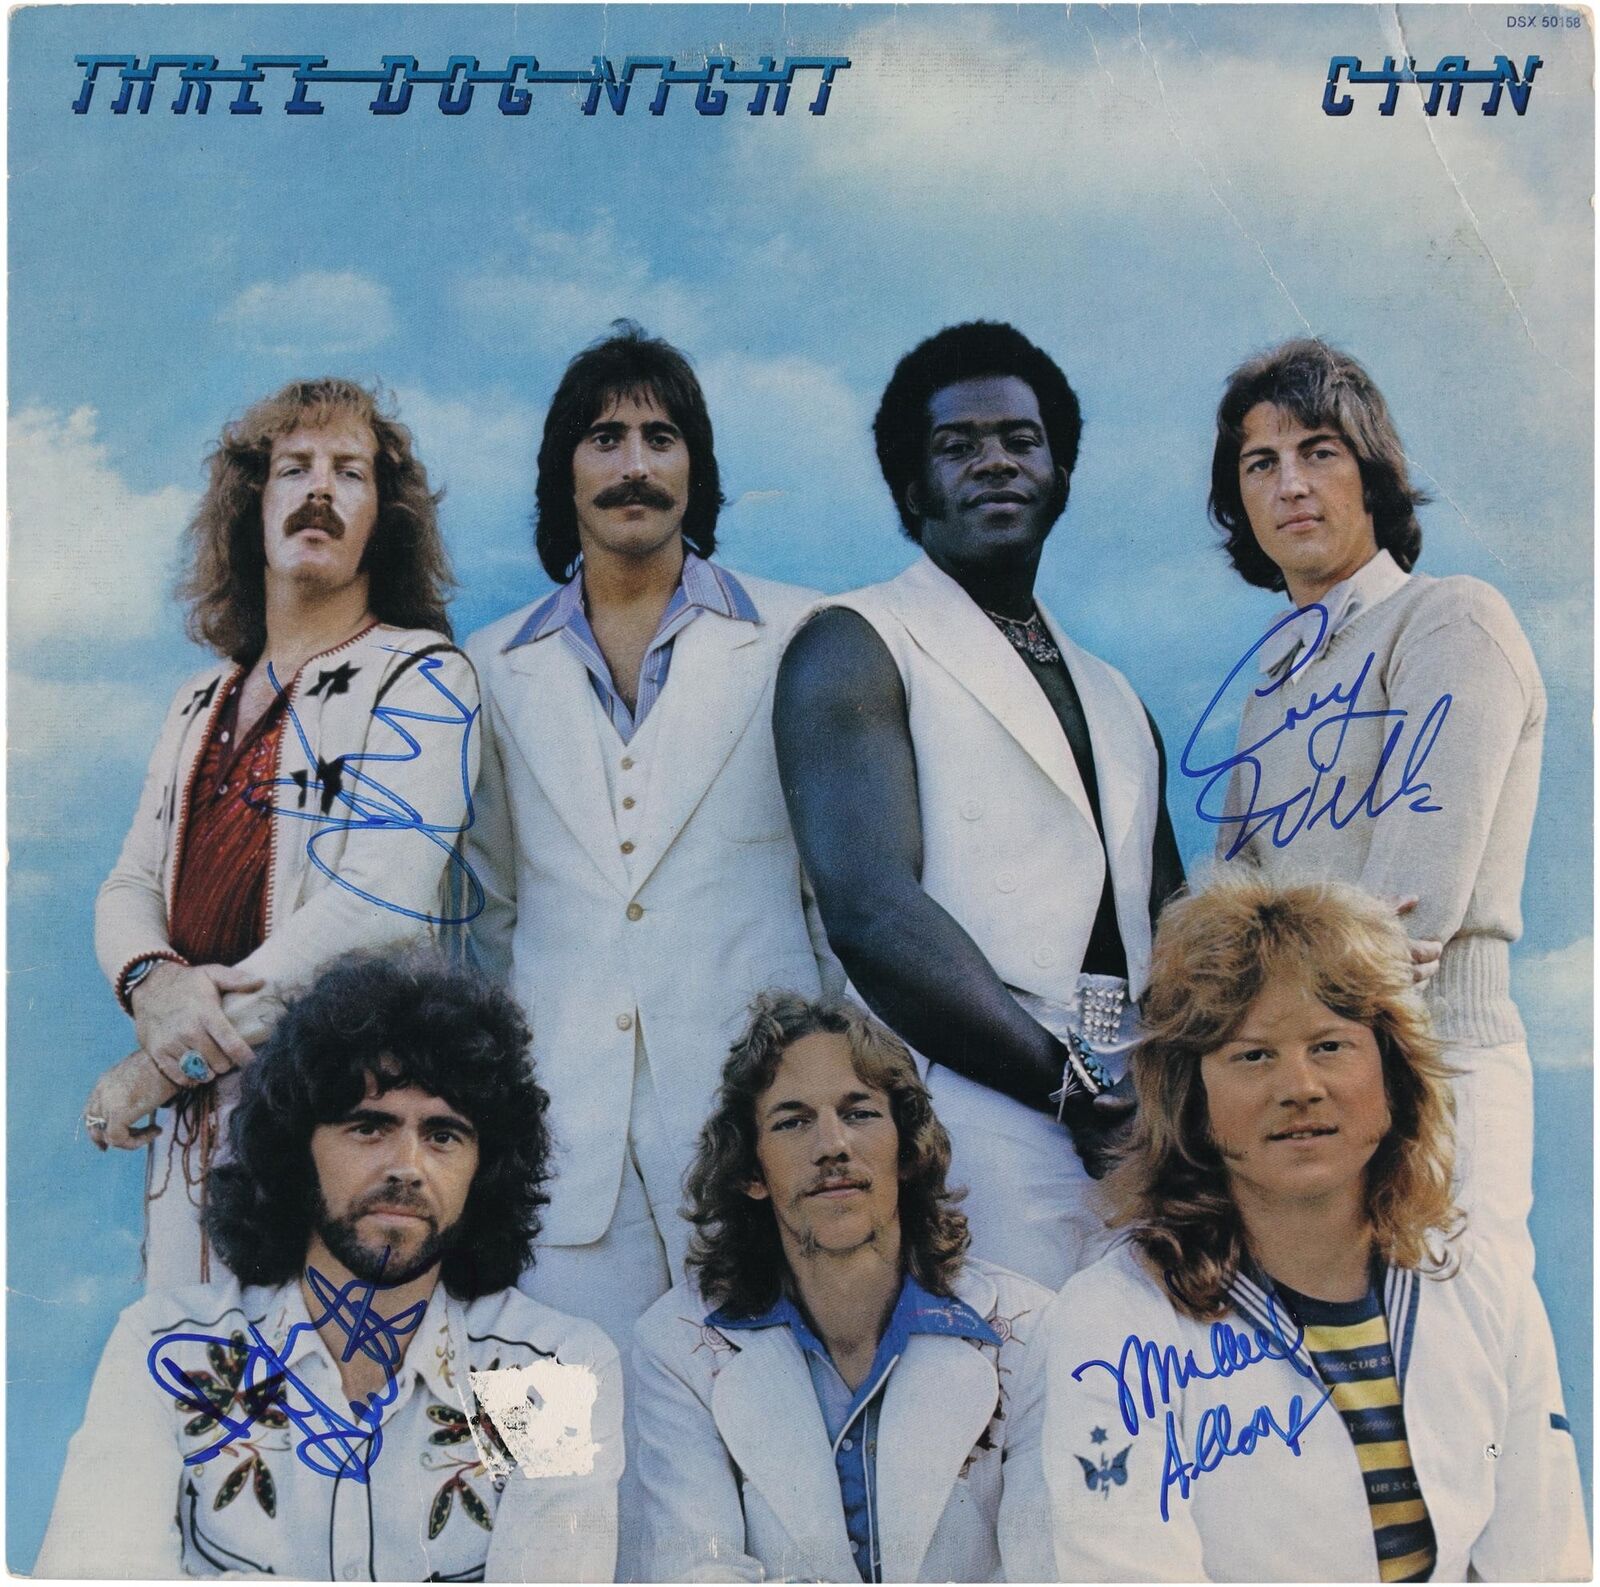 Three Dog Night Autographed Cyan Album Cover with 4 Signatures BAS